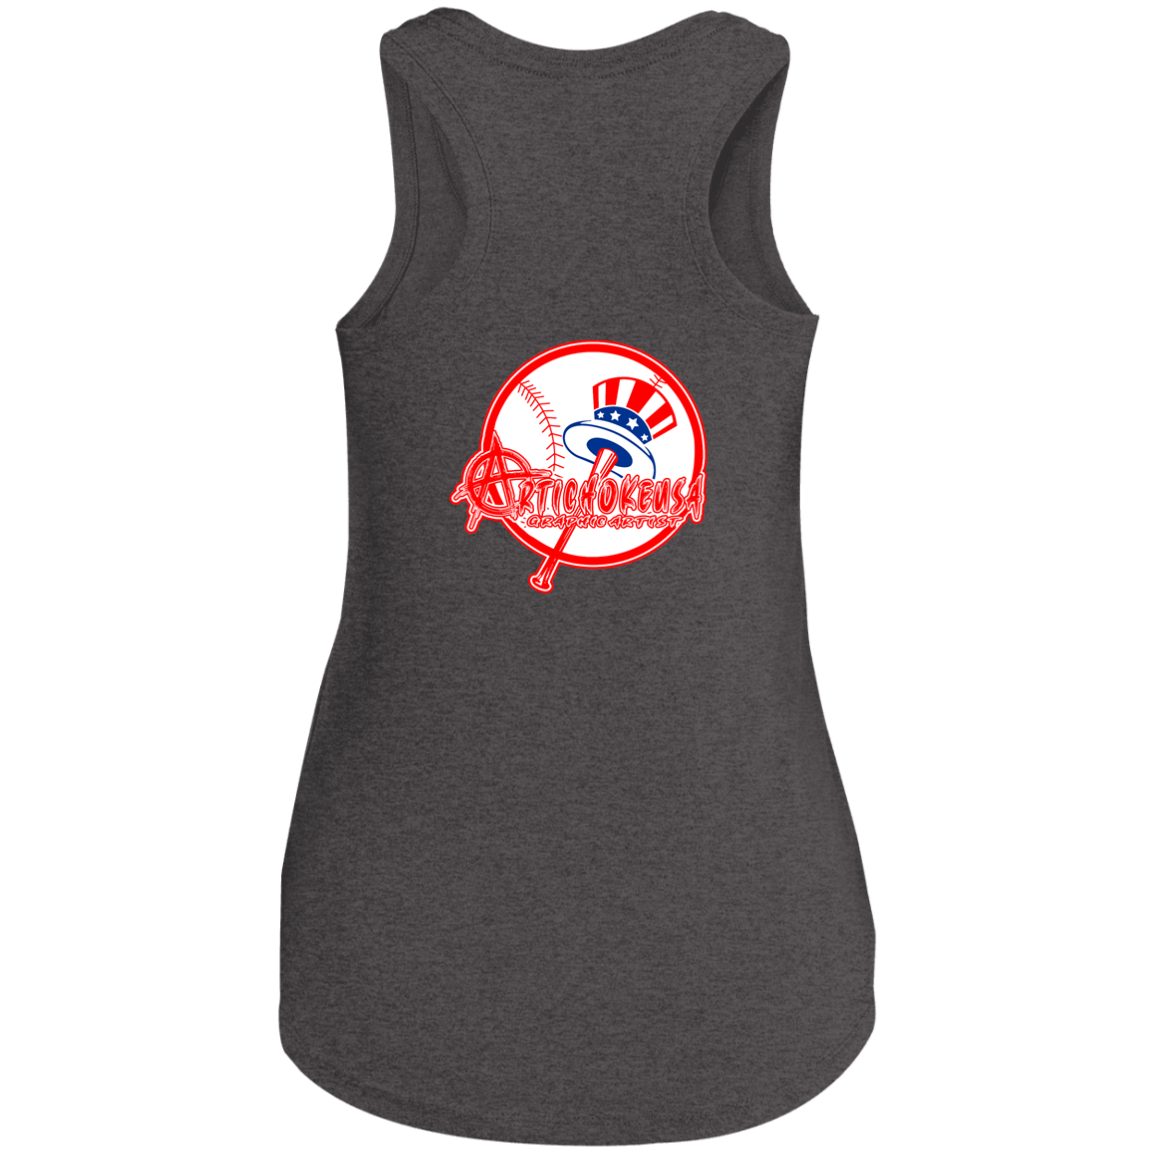 ArtichokeUSA Character and Font Design. Let’s Create Your Own Design Today. Brooklyn. Ladies' Tri Racerback Tank